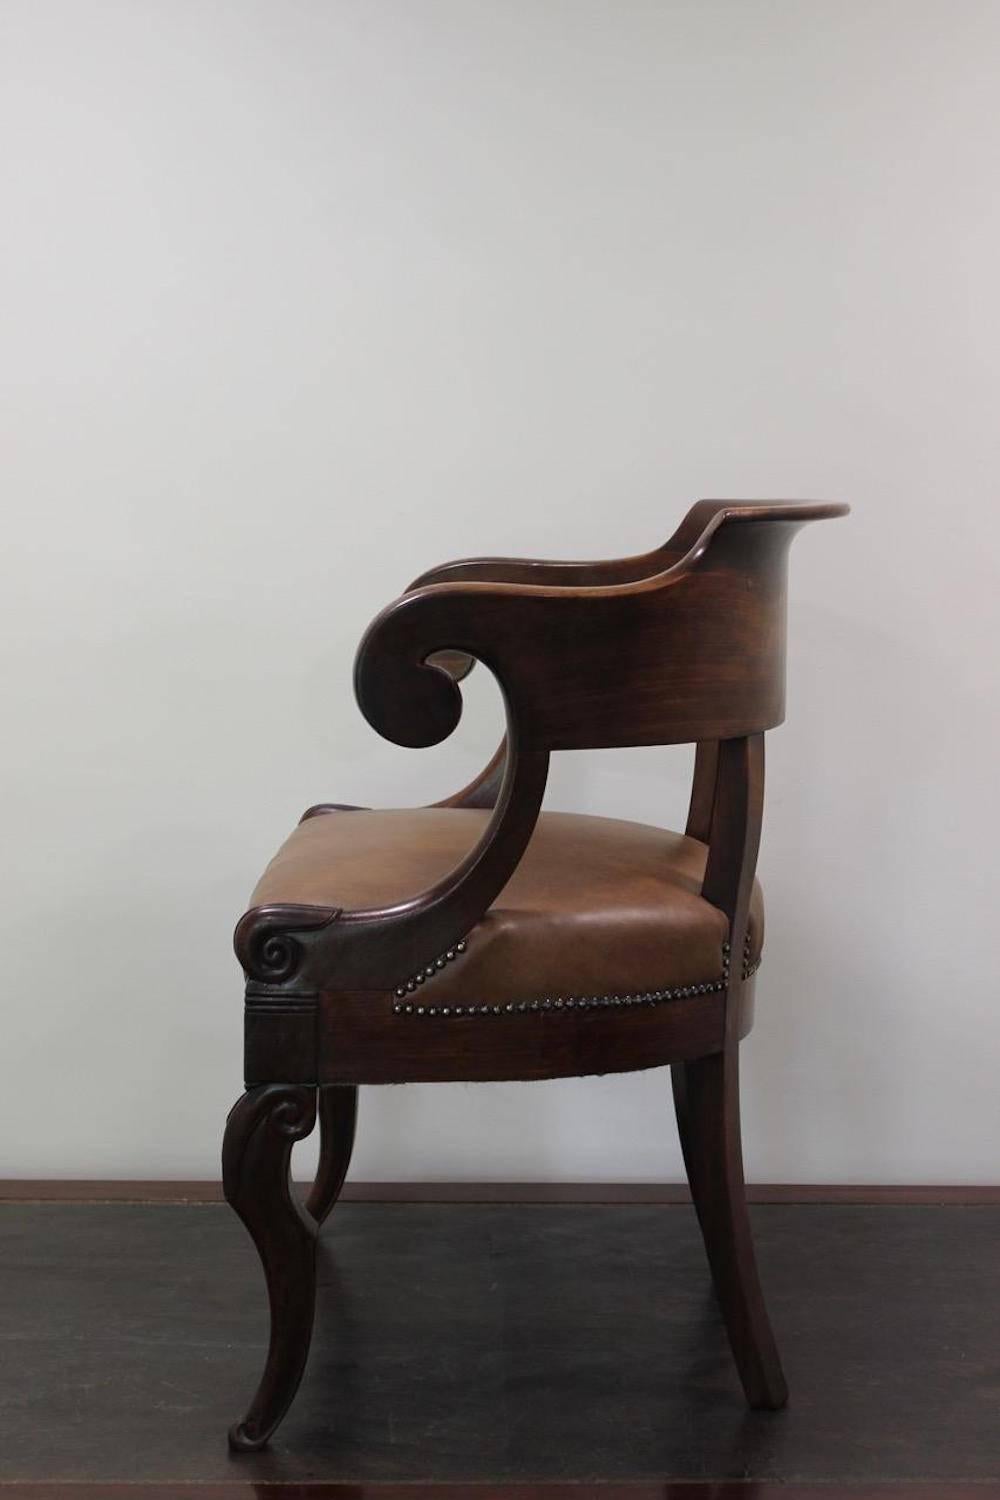 A good quality Louis Philippe mahogany desk chair or 'fauteuil de bureau' with close nailed brown leather upholstery, the frame with accentuated curves and good color and patination, French, second quarter of the 19th century.